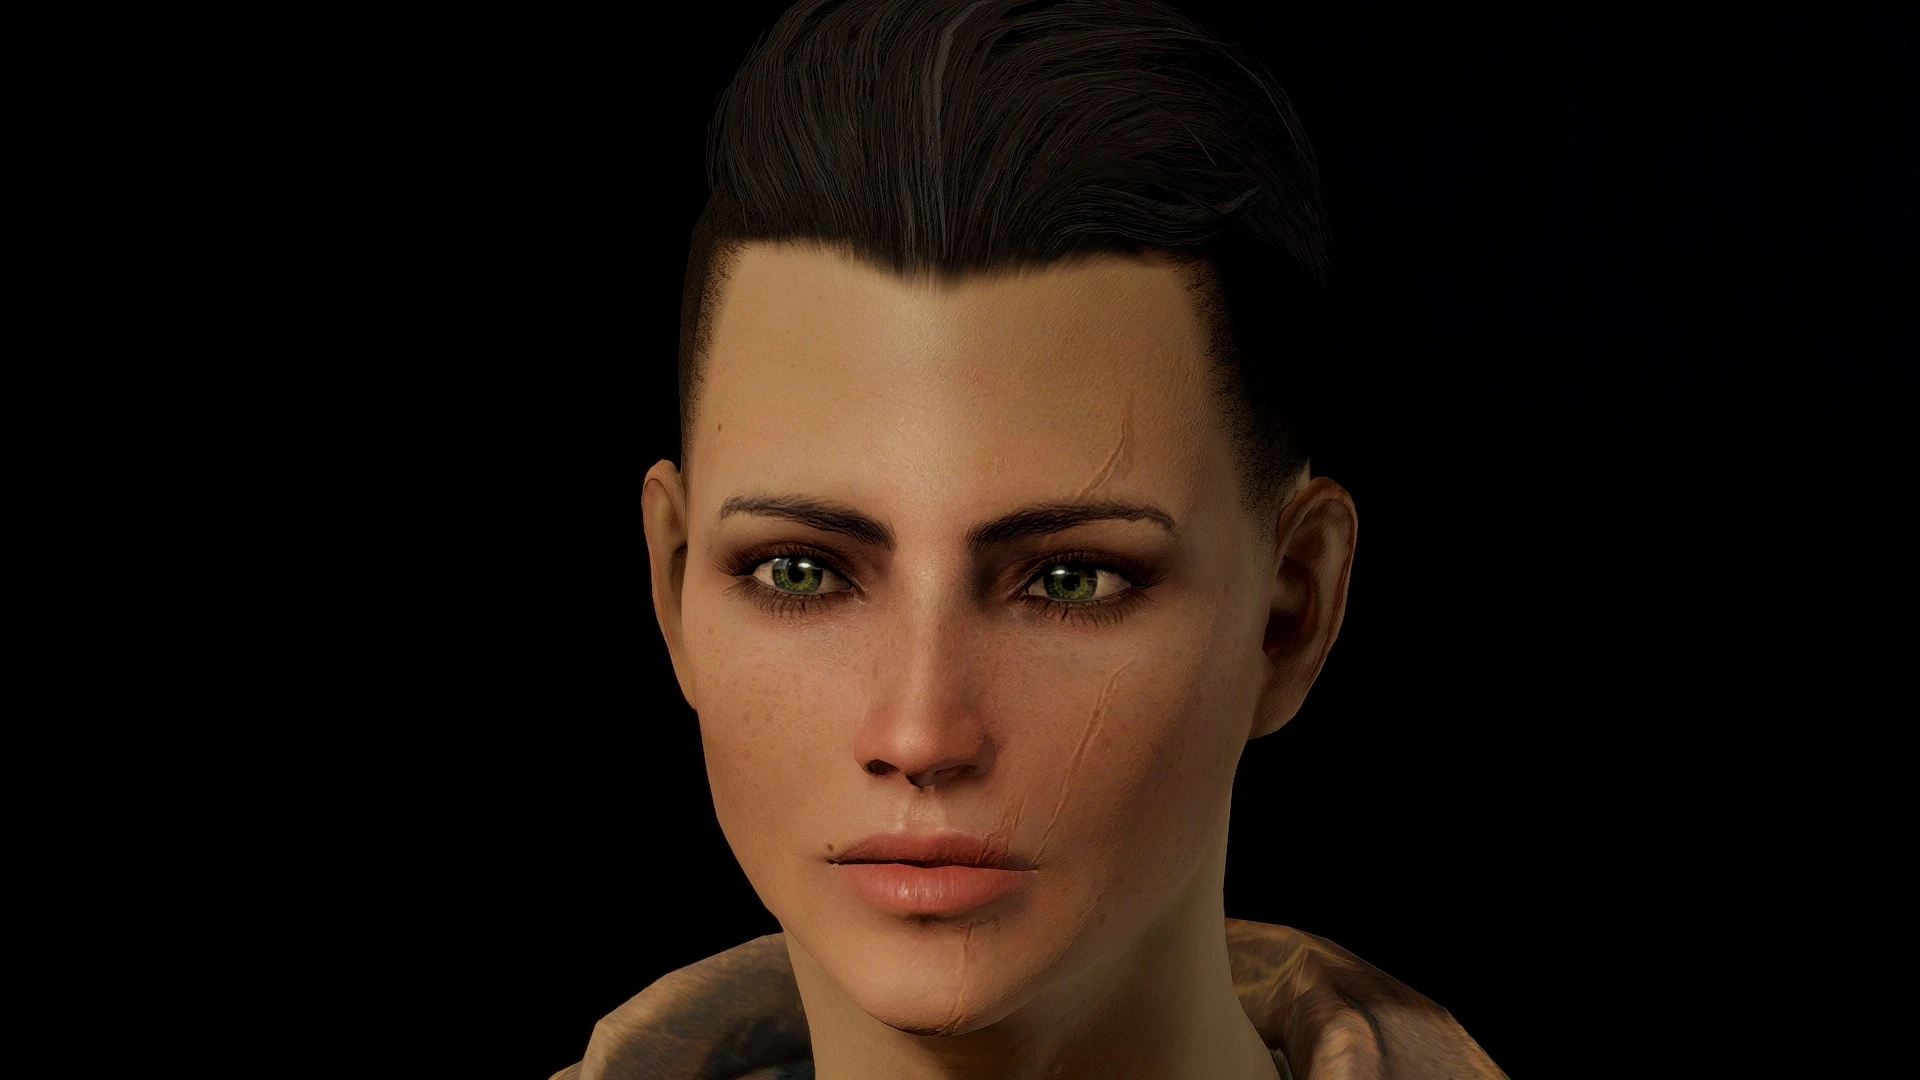 Caelan and Roy - Two characters face presets at Fallout 4 Nexus